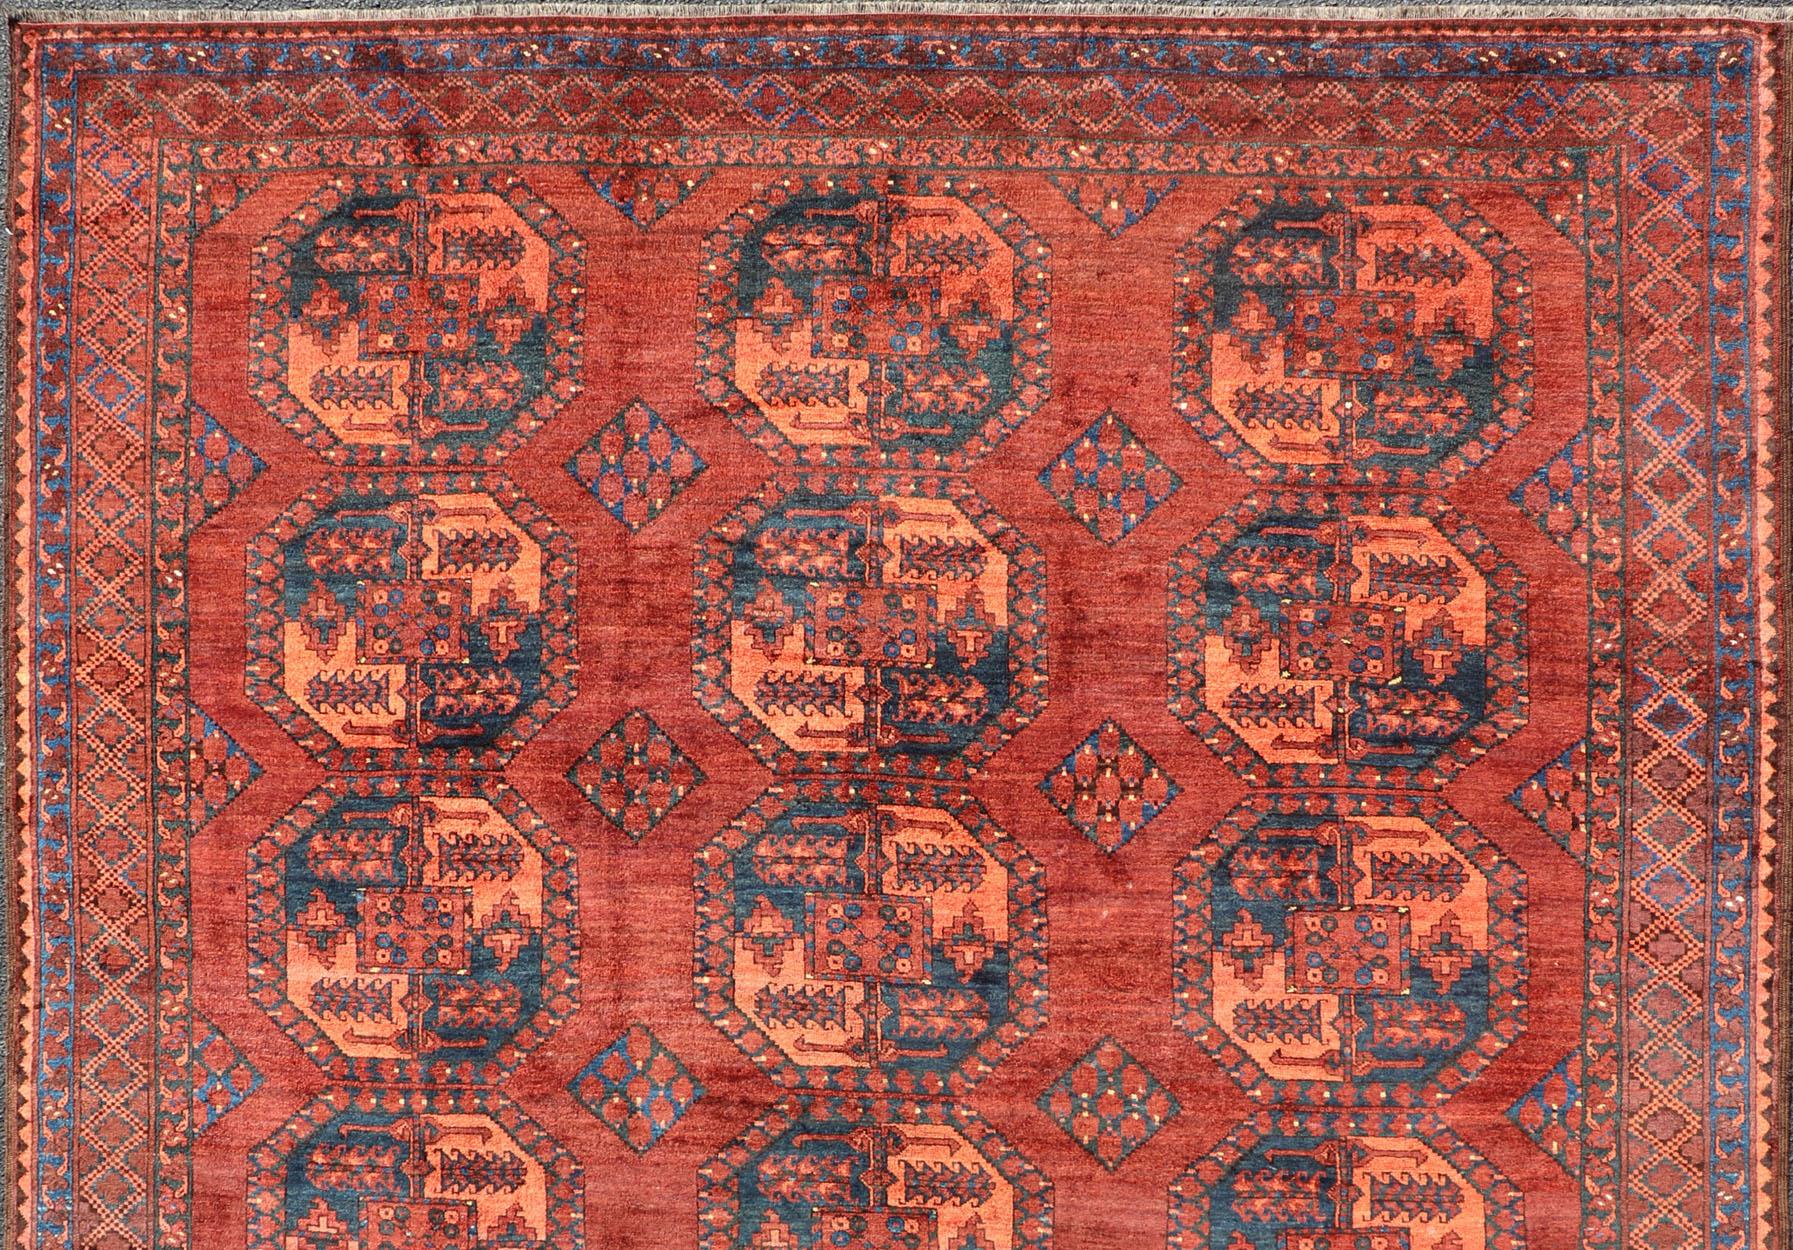 This Turkomen Ersari rug has been hand-knotted in the finest wool. The rug features a repeating Gul design throughout the entirety of the rug, enclosed within a complementary, multi-tiered border, depicting small repeating motifs. The rug is